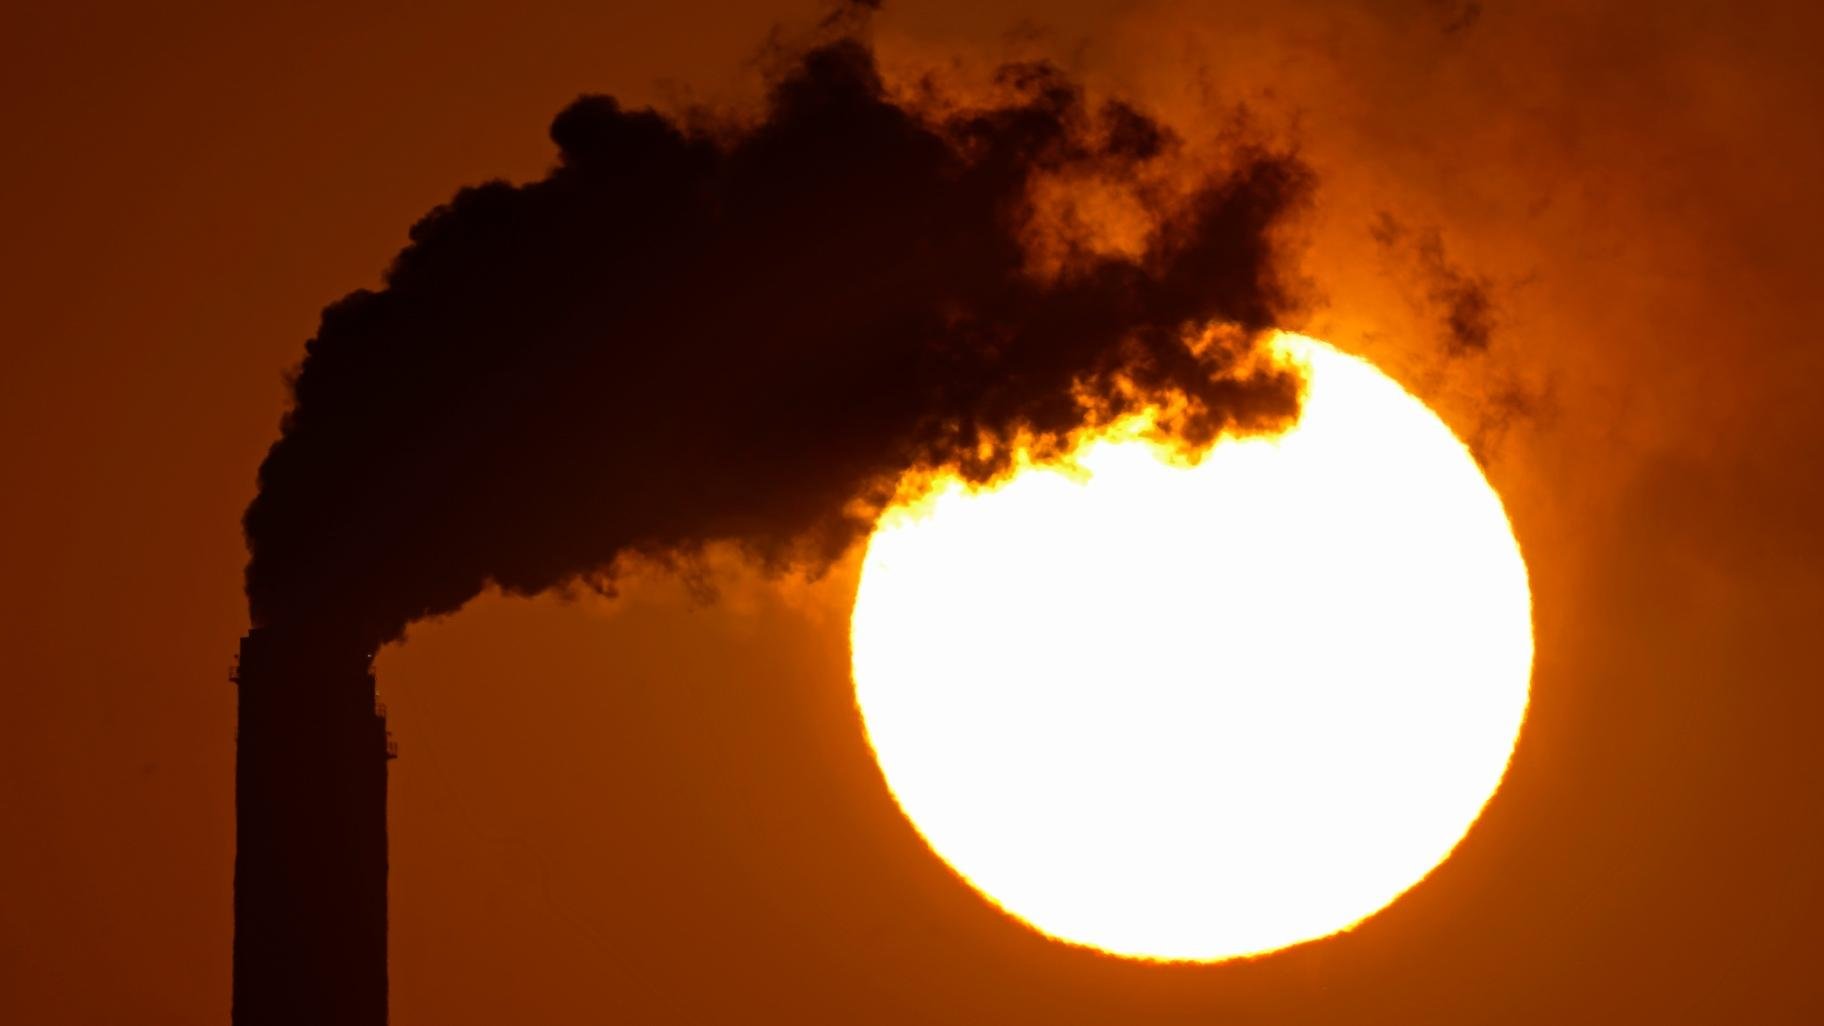 Emissions rise from the smokestacks at the Jeffrey Energy Center coal power plant as the suns sets Sept. 18, 2021, near Emmett, Kan. (AP Photo / Charlie Riedel, File)